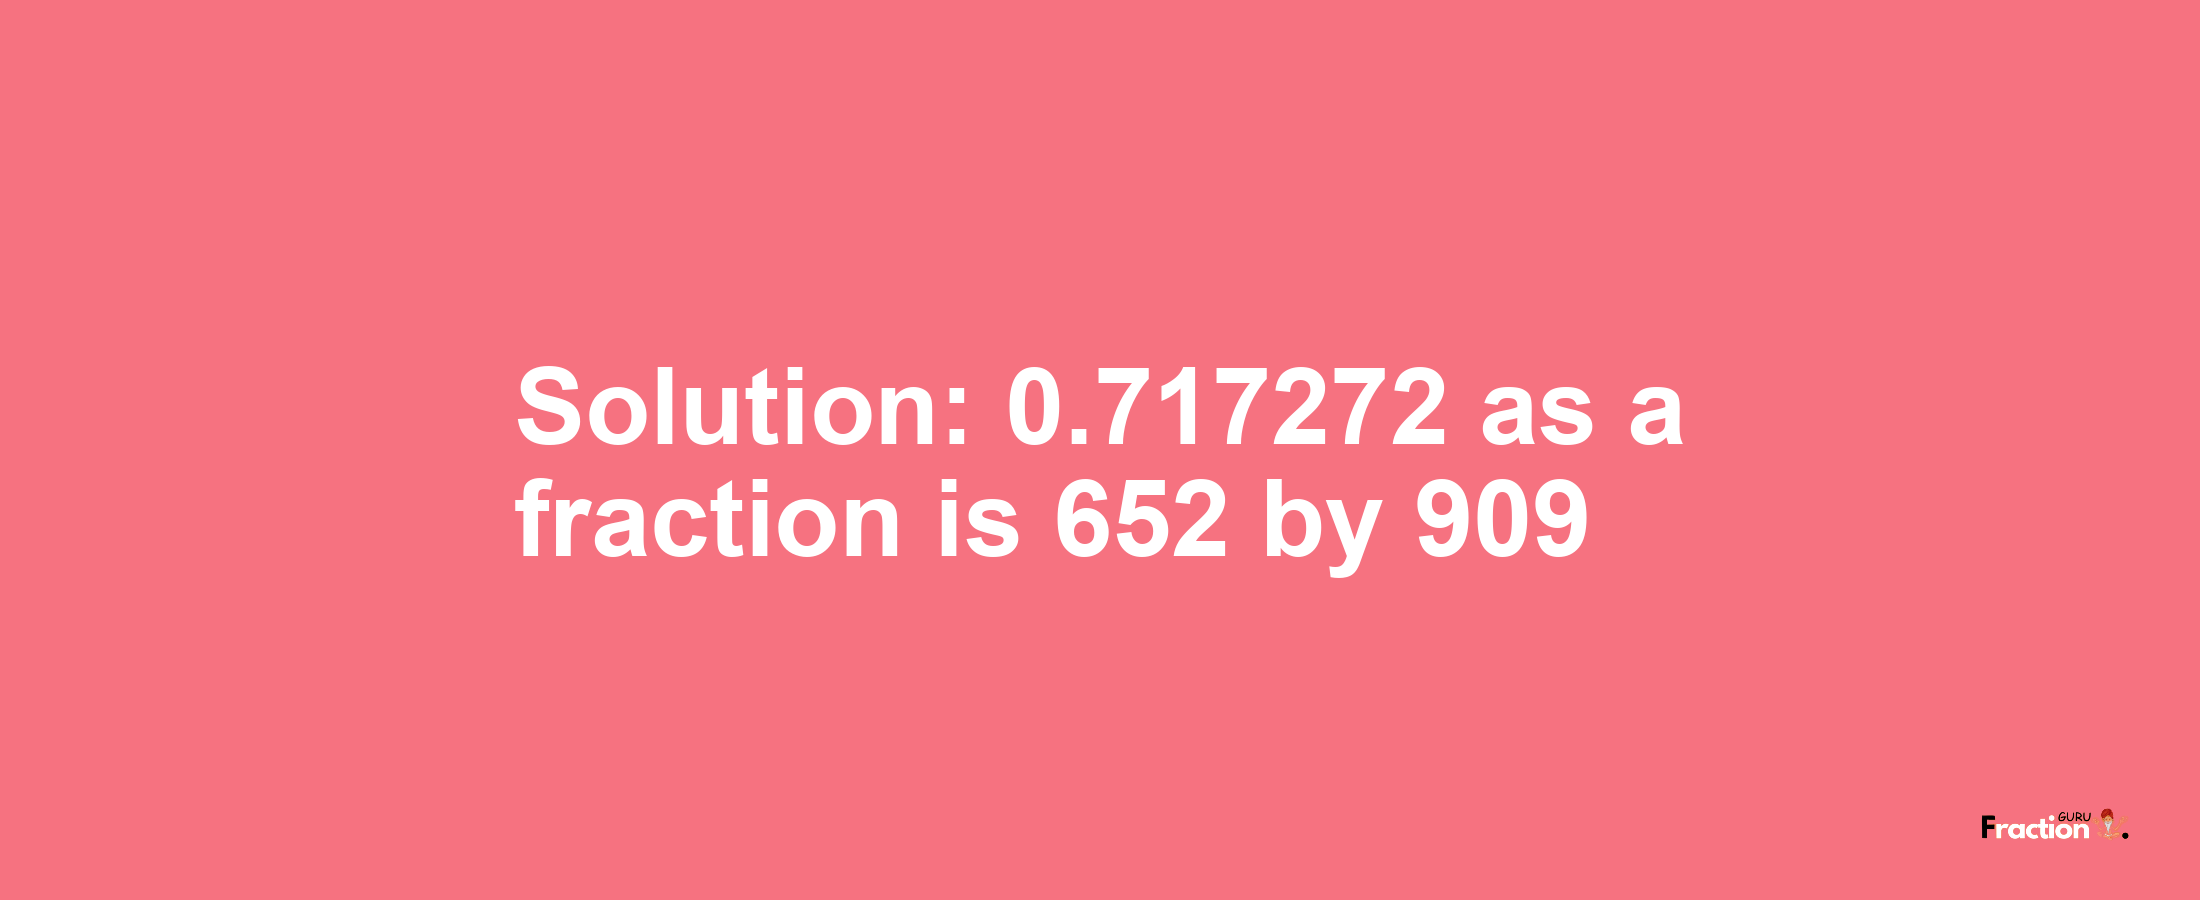 Solution:0.717272 as a fraction is 652/909